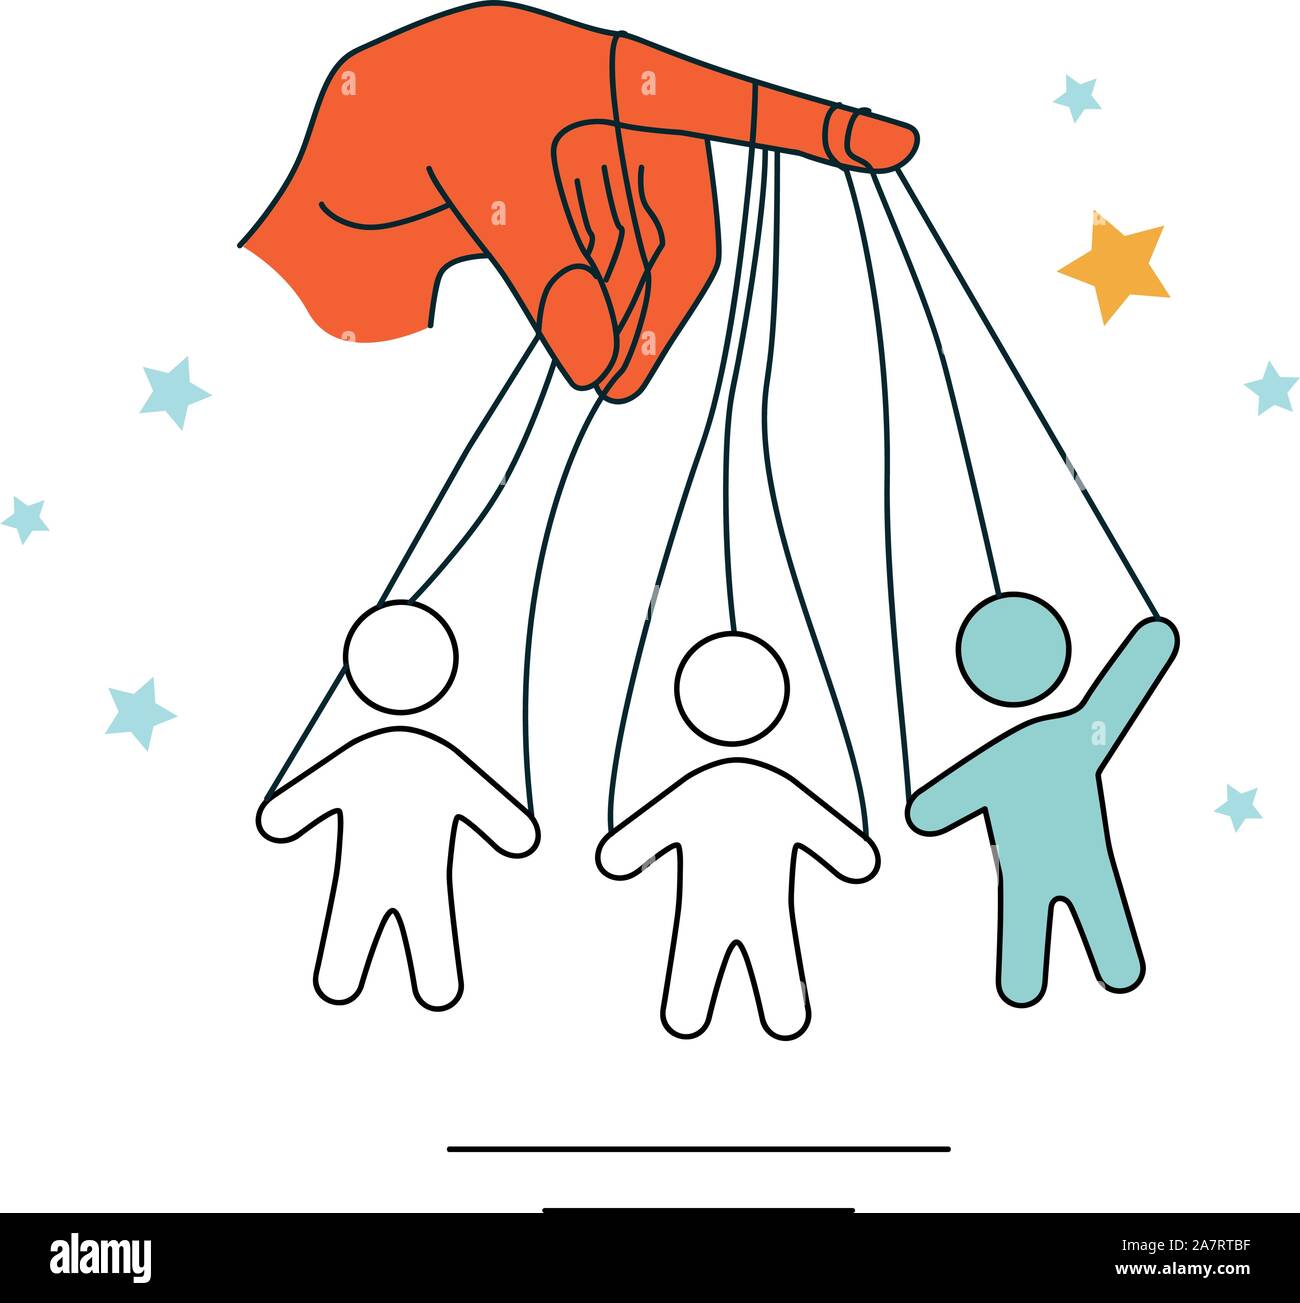 Vector illustration of a hand with figures of dolls on the ropes. Concept of Manipulation, control, management. Election technology, cheating voters. Stock Vector